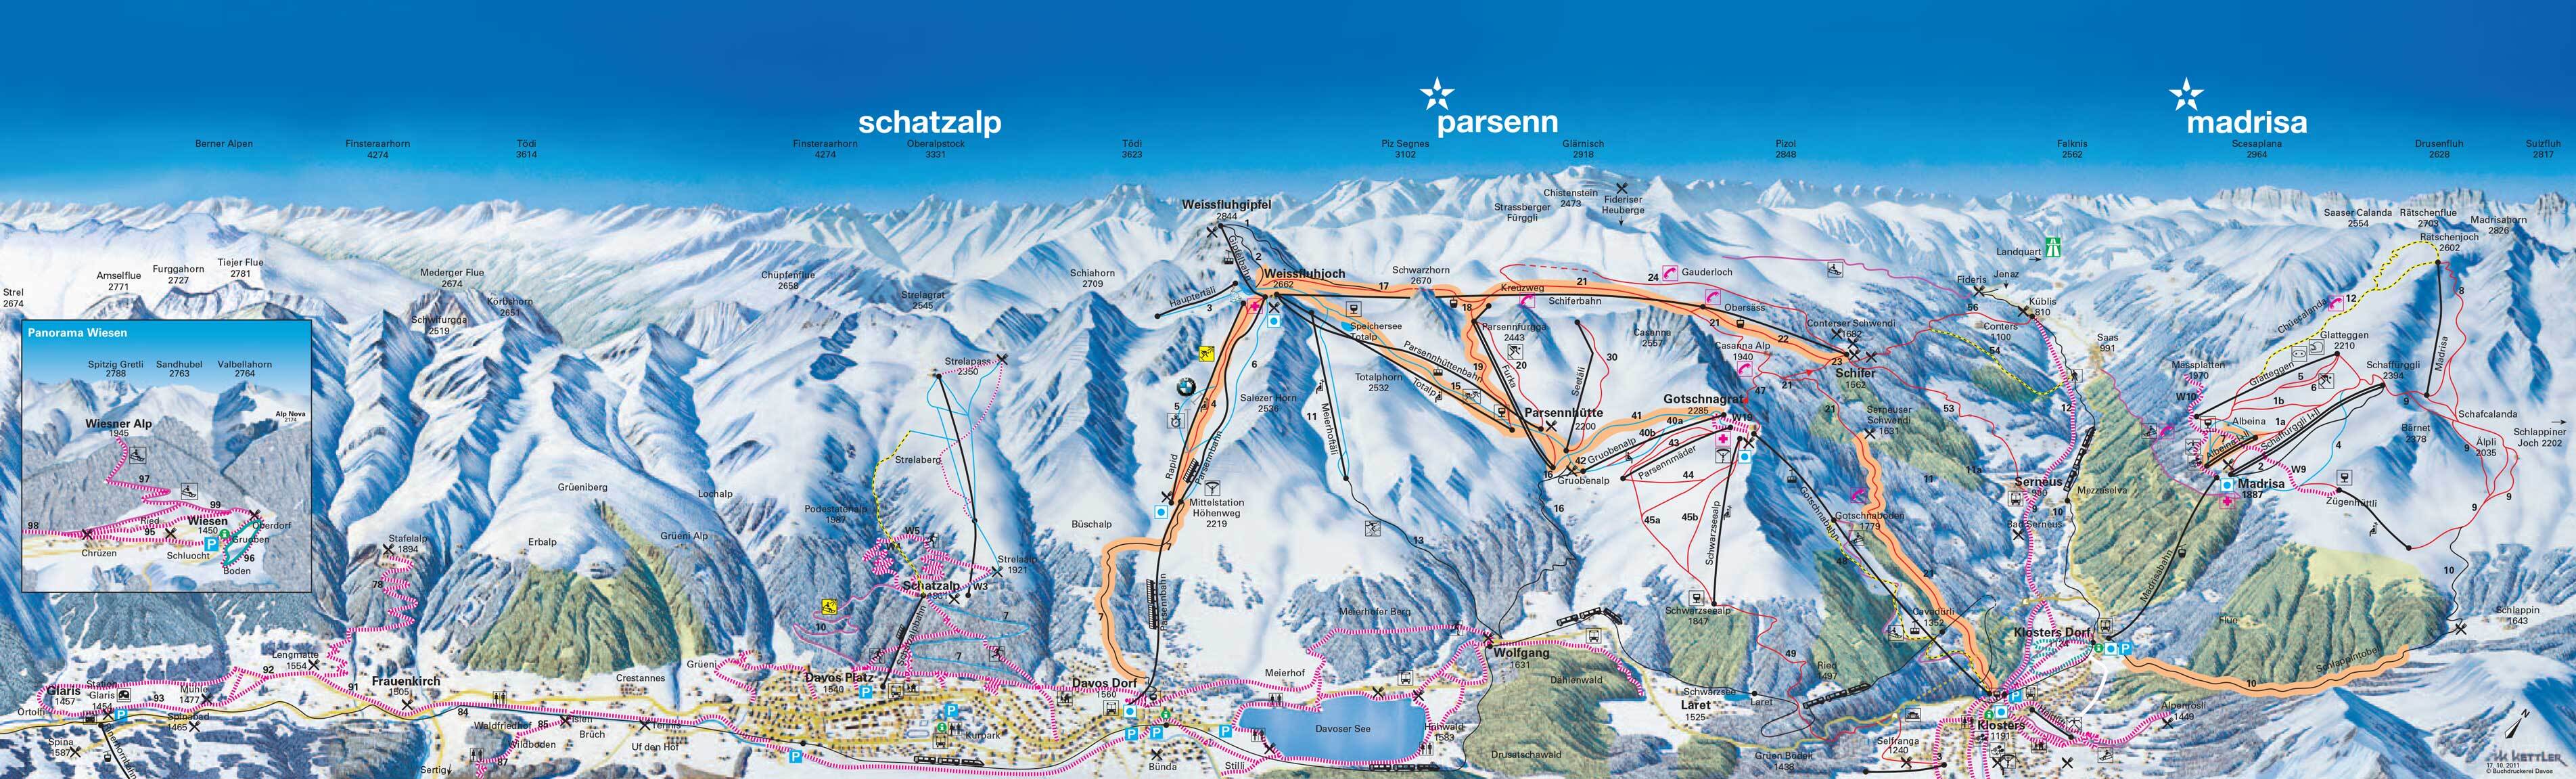 Klosters Piste / Trail Map